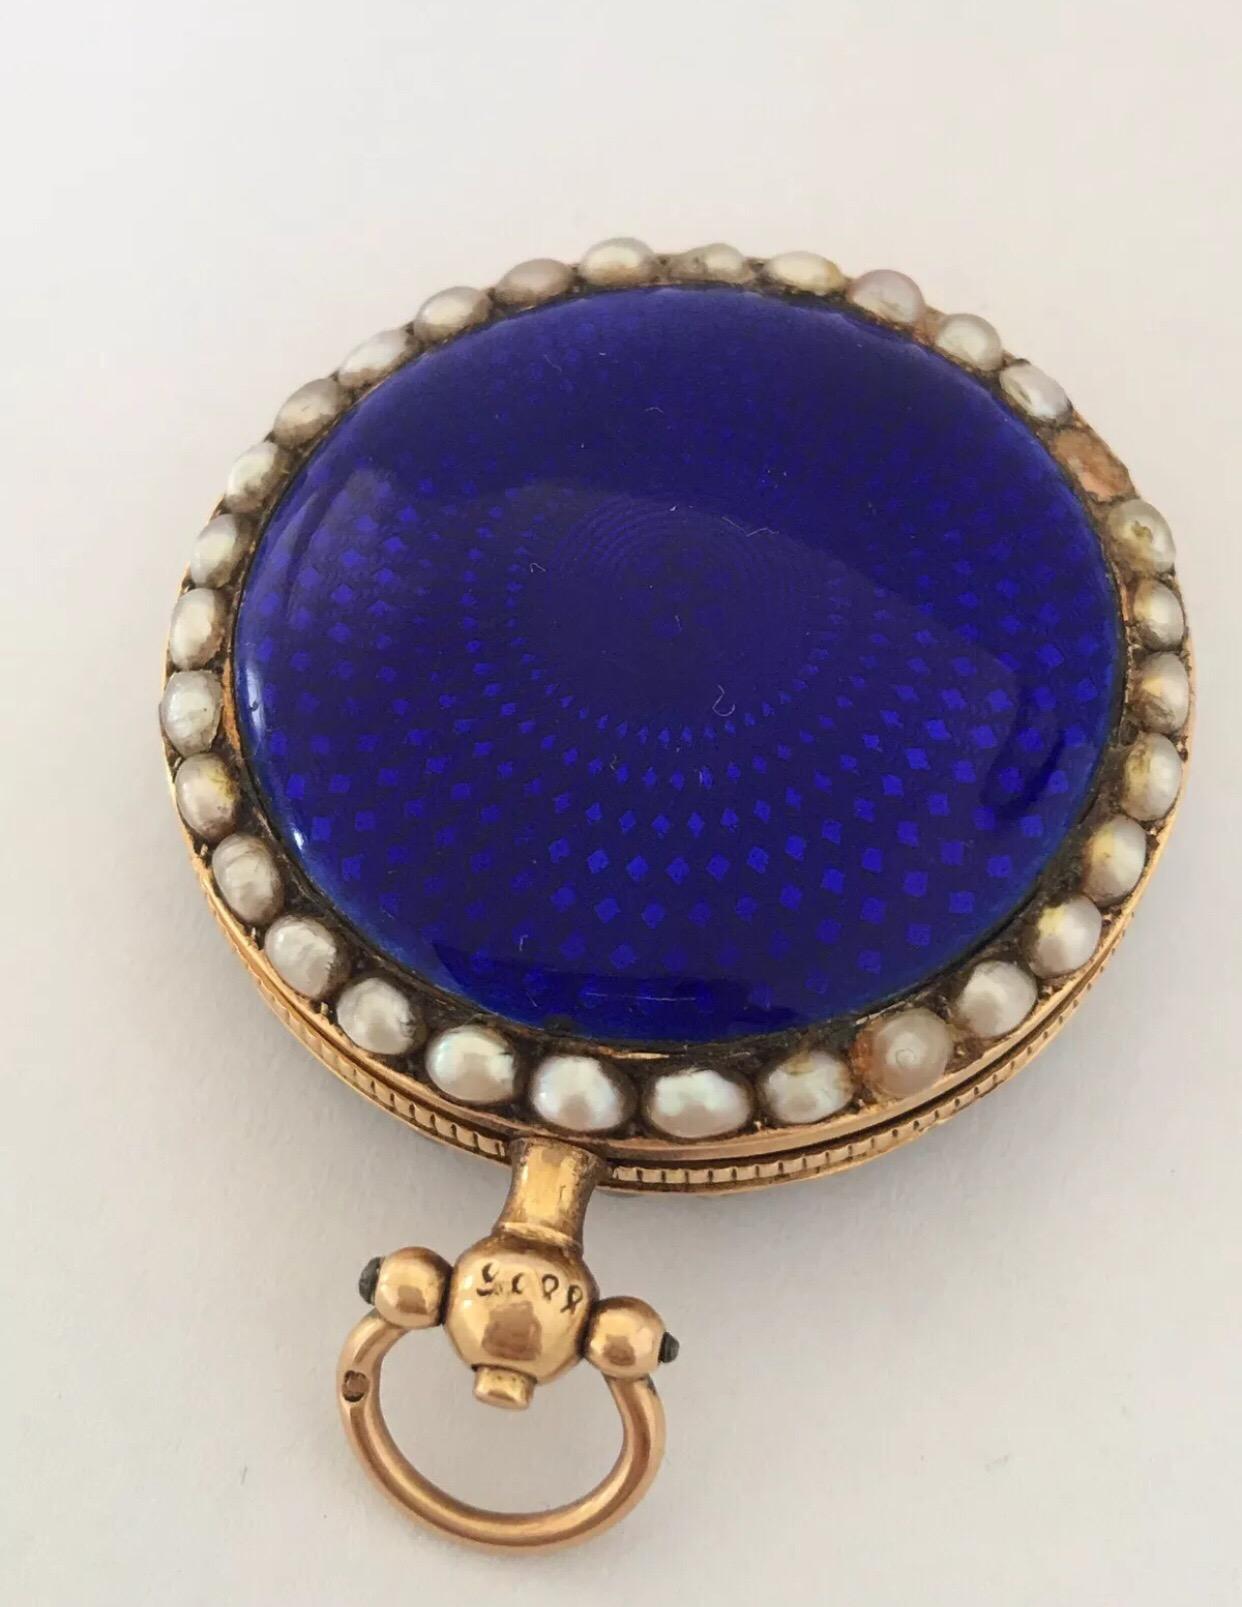 Blue Enamel & Gold Full Hunter Cased Fob Watch signed Champion A’ Paris For spares or repair.


This beautiful fob watch is not working and the balance in broken (not spinning) 4 seeds pearl missing, minute hand missing, front cover enamel is darker